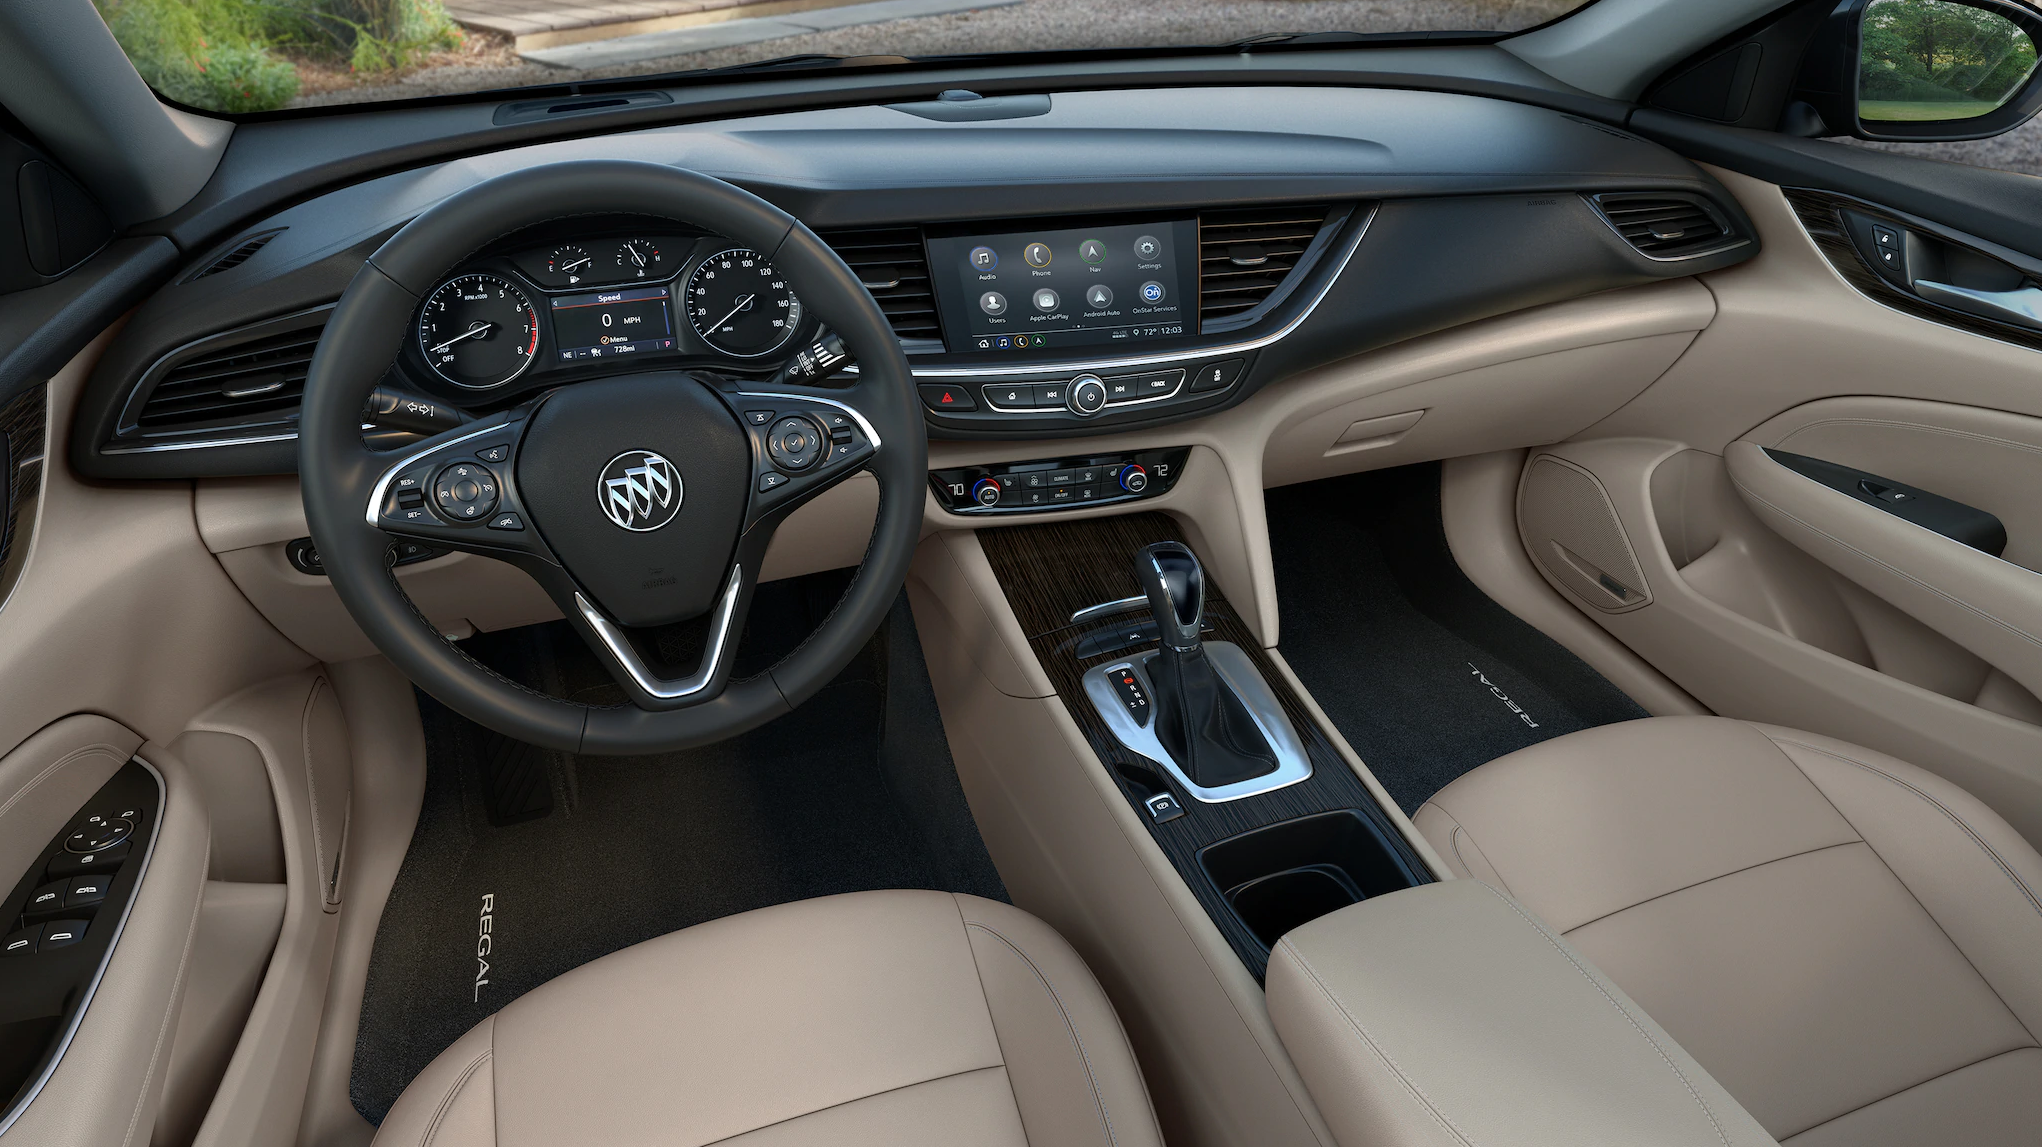 2020 Buick Regal Sportback Review, Pricing, and Specs